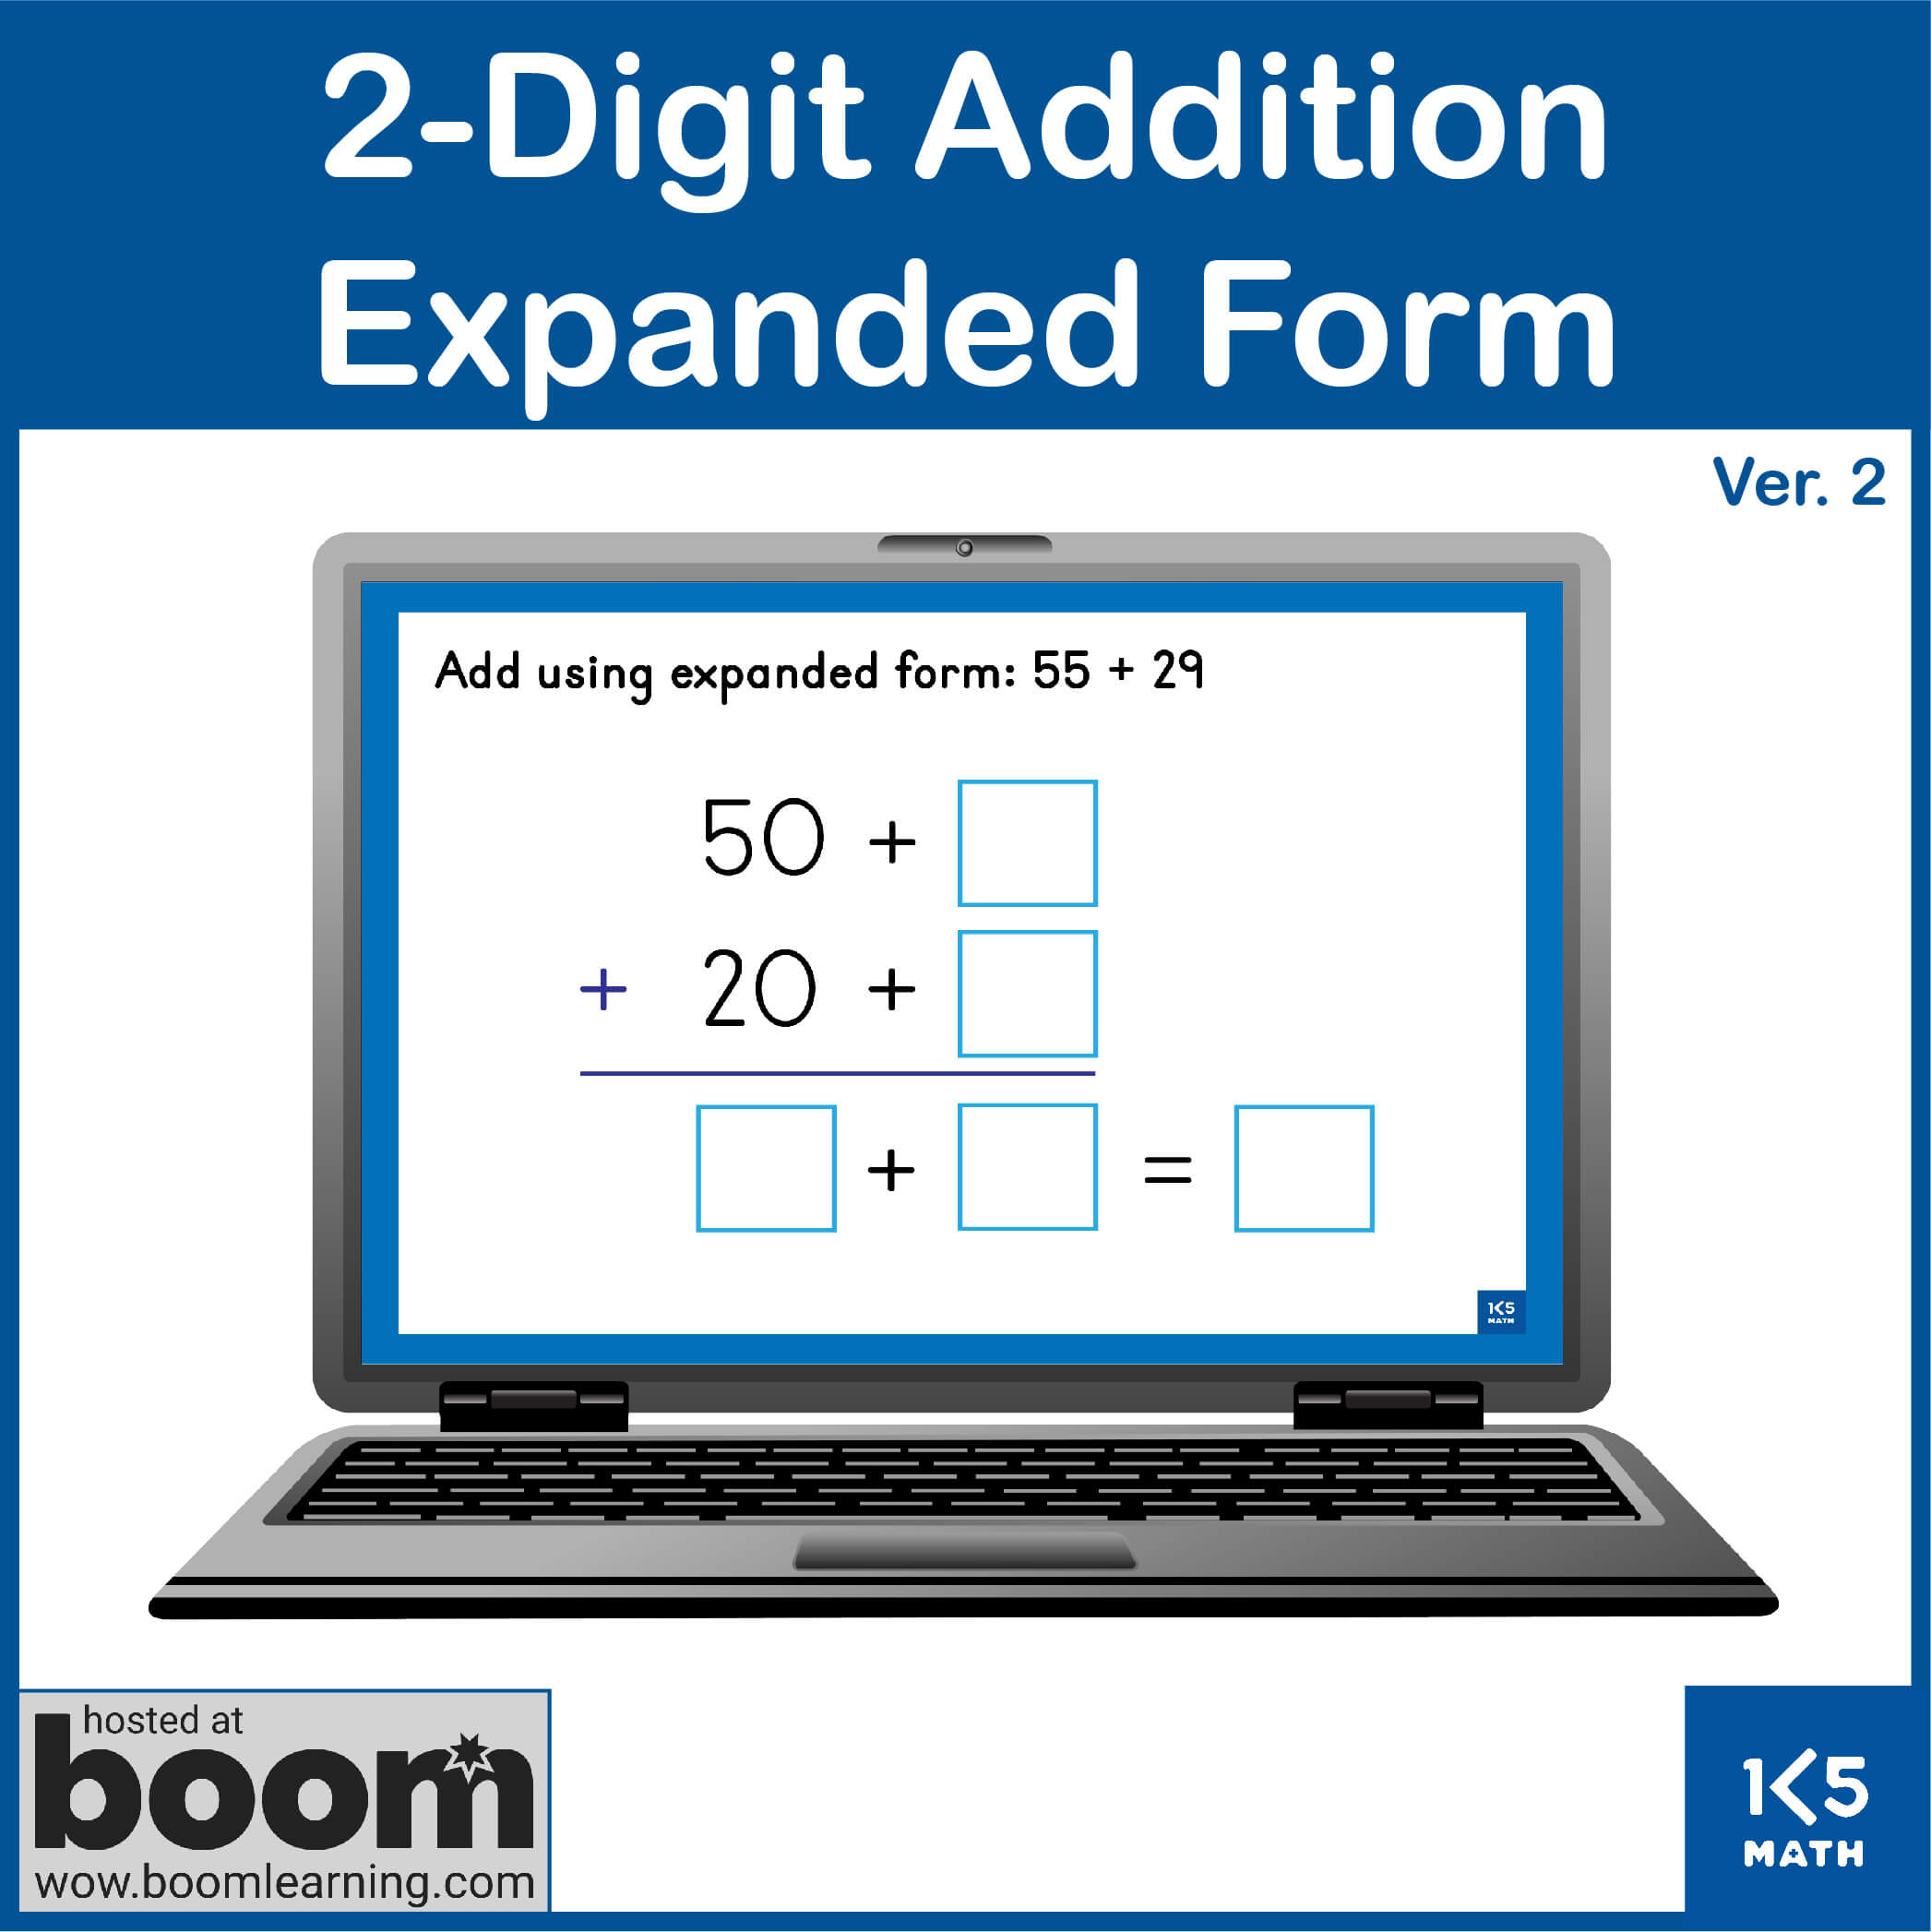 Boom Cards: 2-Digit Addition Expanded Form (with regrouping)